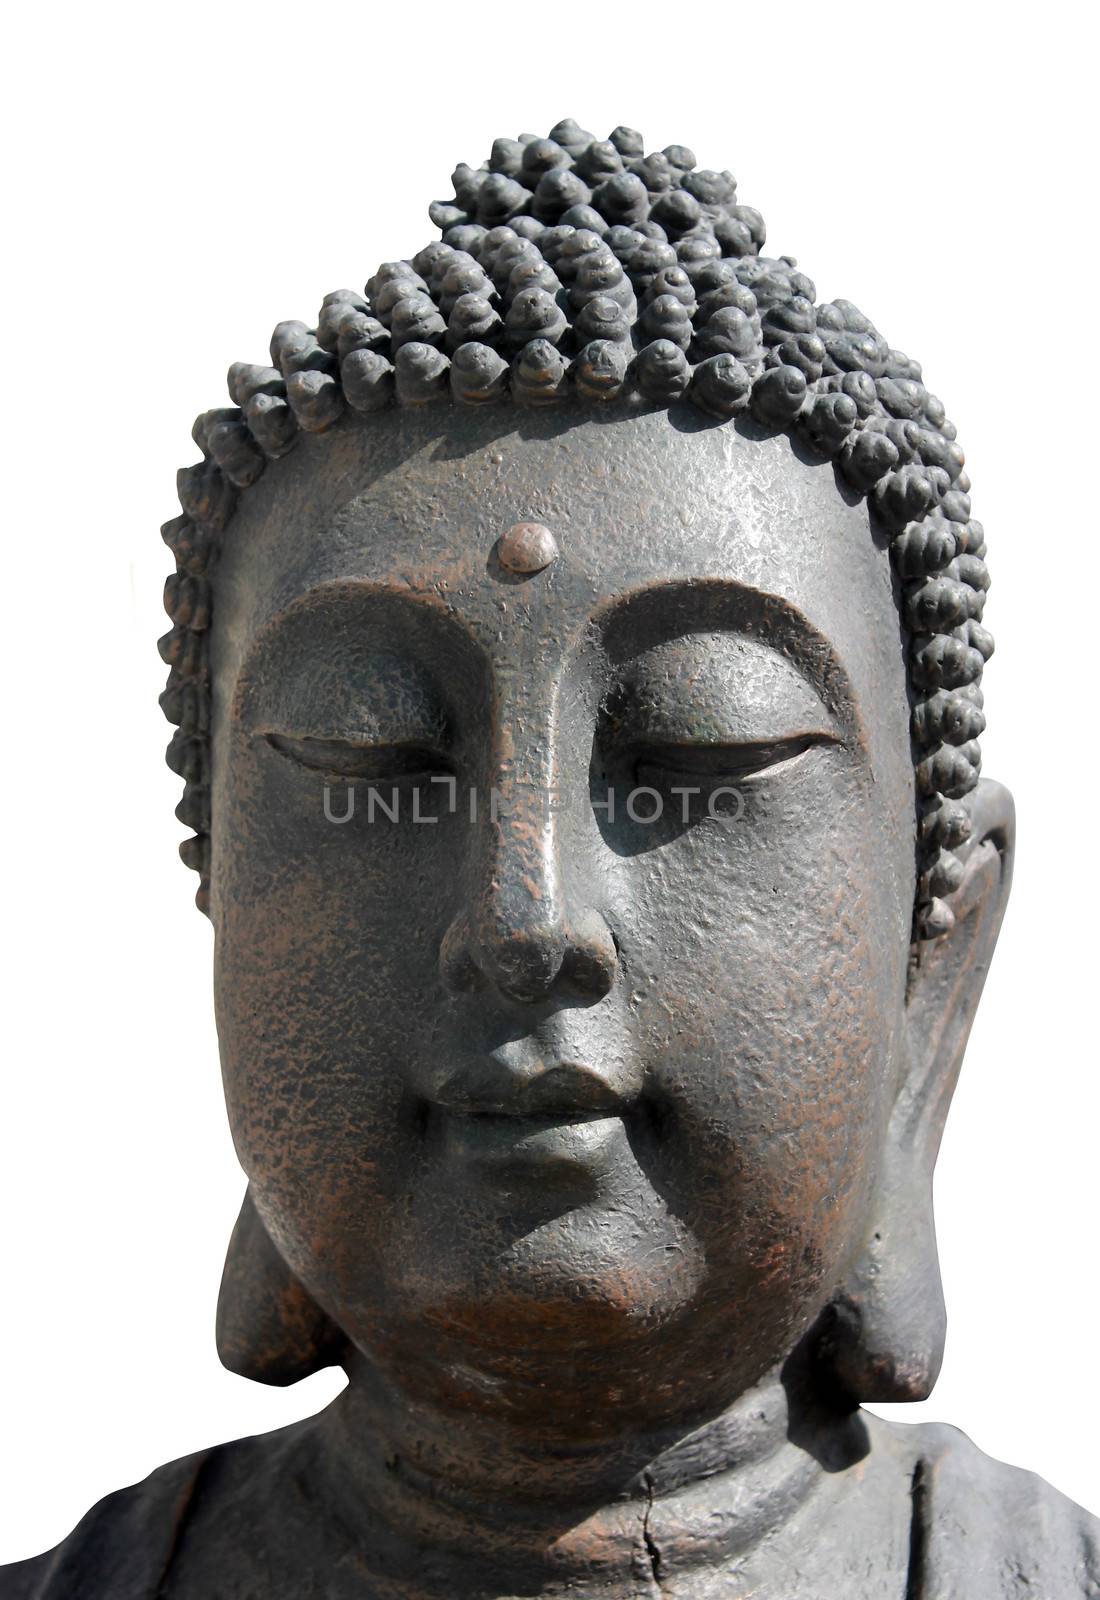 Face of Buddha on statue outdoors, isolated on white background.